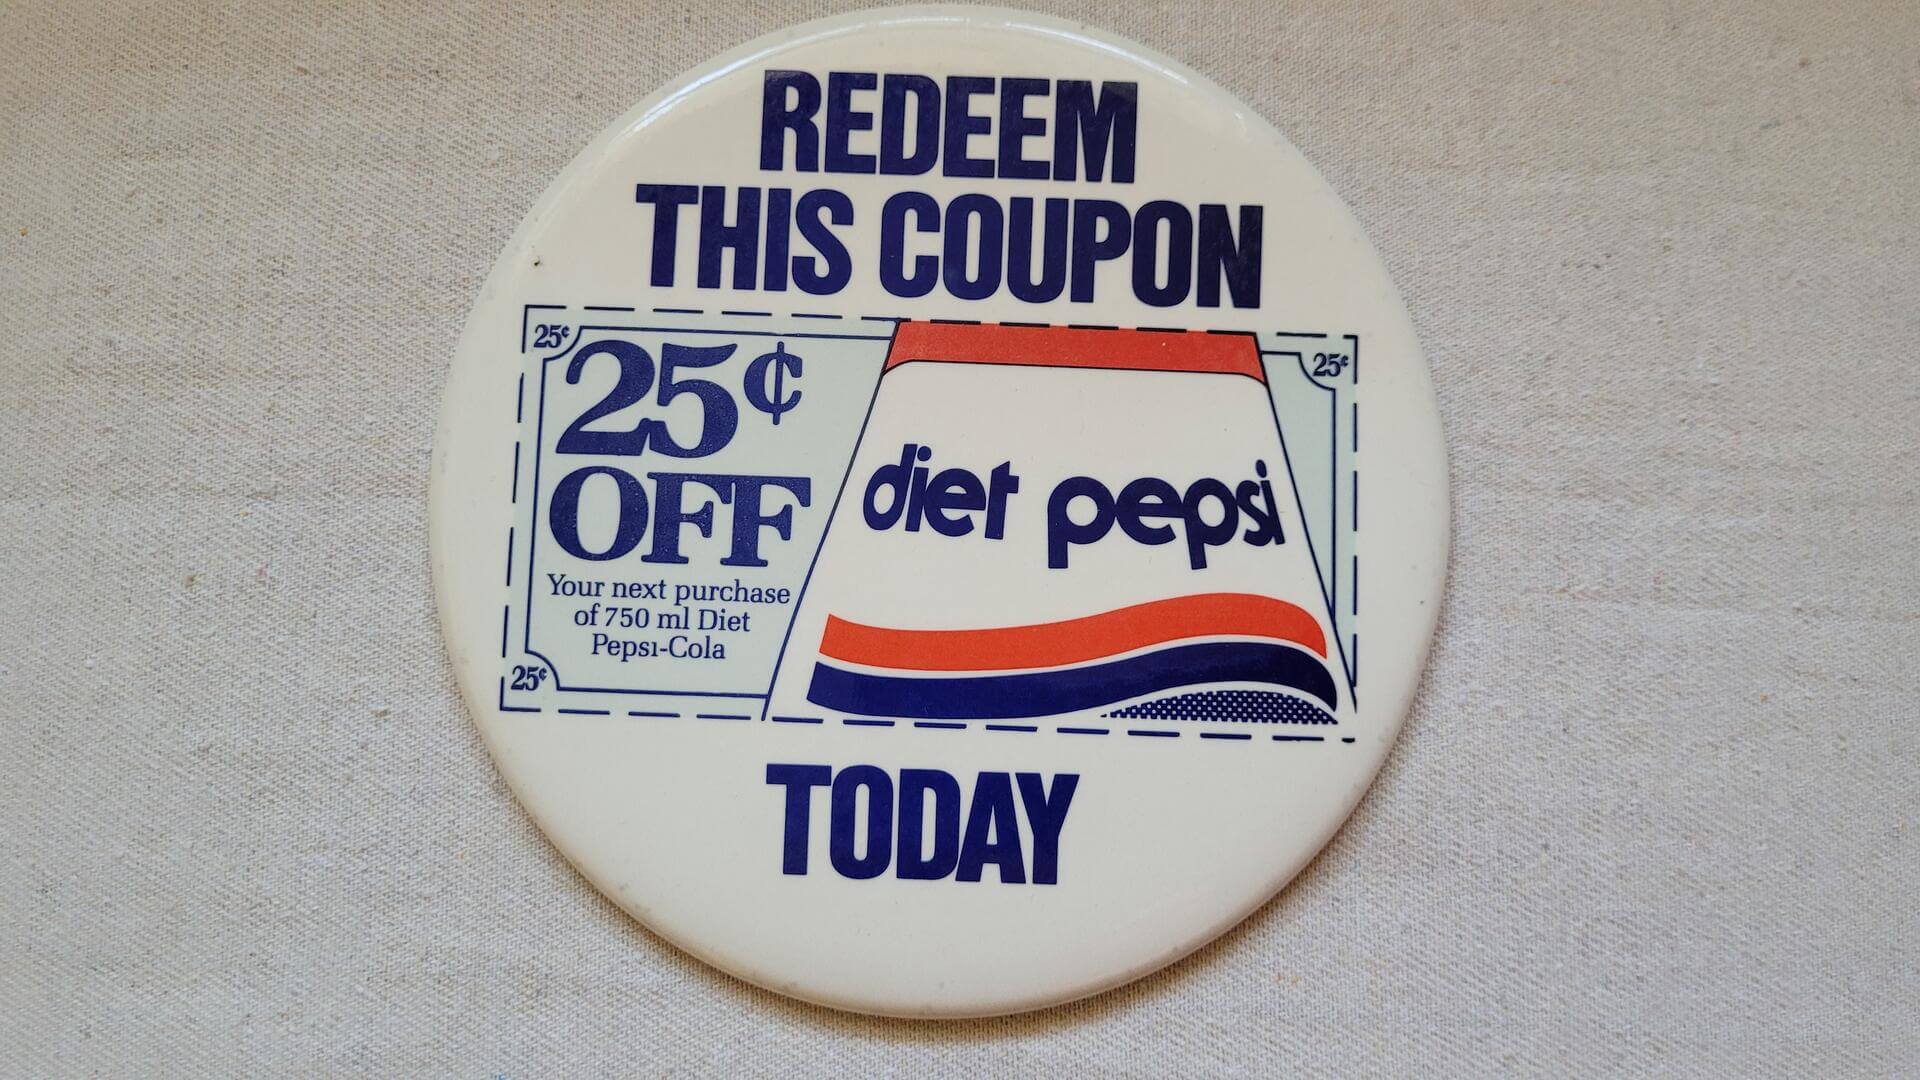 Vintage Diet Pepsi In Store Promotional 6" Pin Pinback Button - Retro 1975-1986 Diet Pepsi Cola branding period soda advertising collectible for 25 cents Off coupon redeption on the next 750ml soda glass bottle